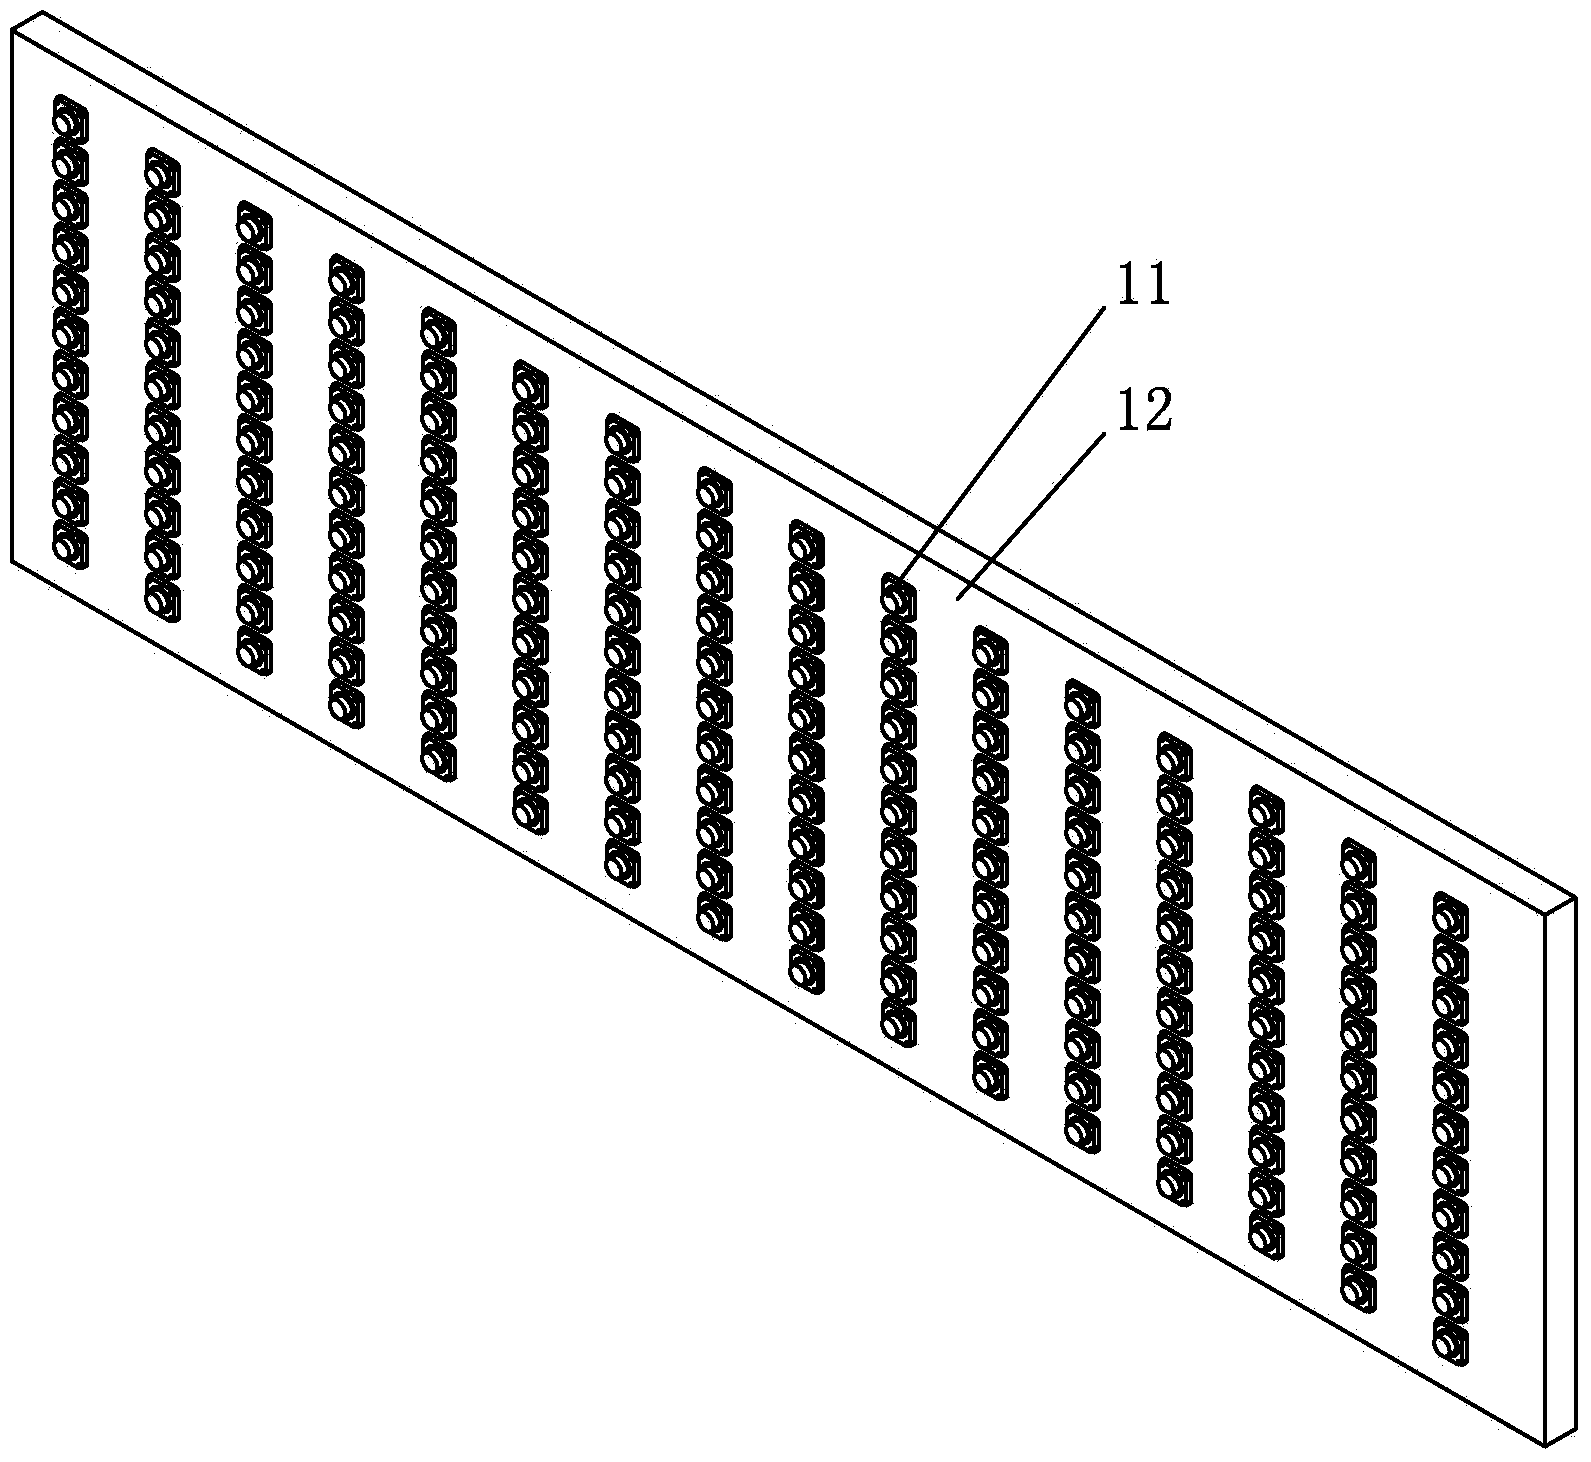 Numerical control telescopic cushion with error compensation function